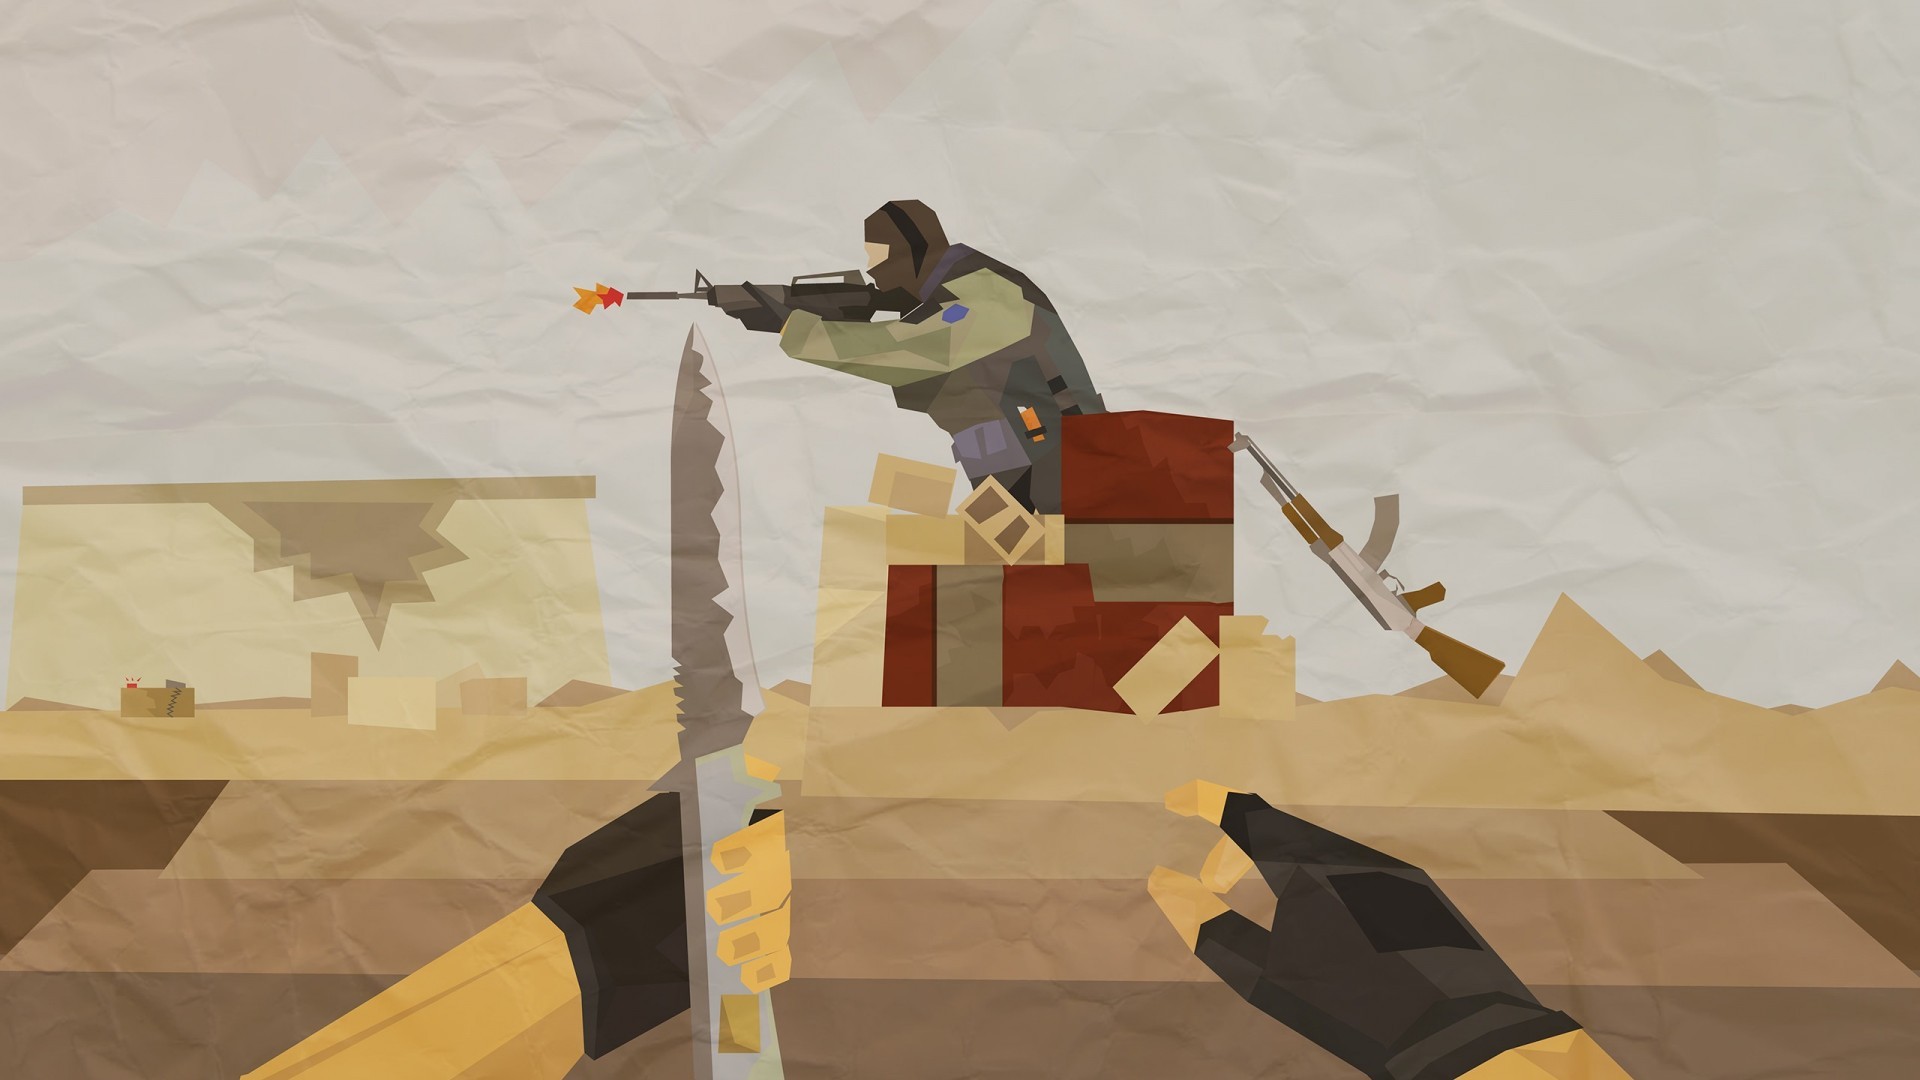 counter strike low poly